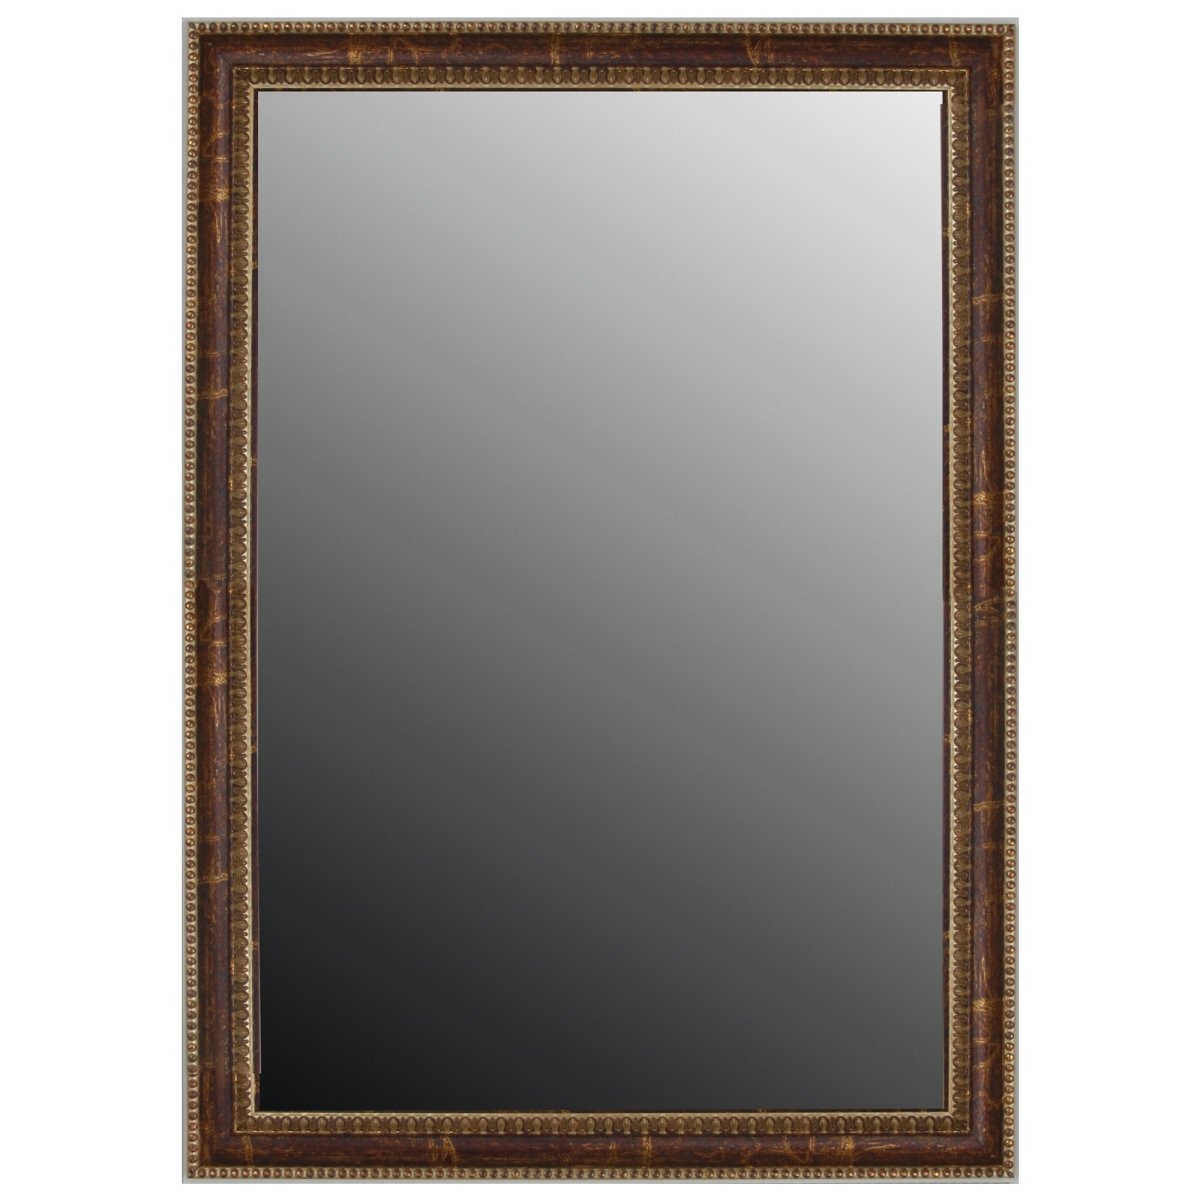 Hitchcock Butterfield 808802 Gold Georgian V Beaded Wall Mirror - 28.25 X 40.25 In.